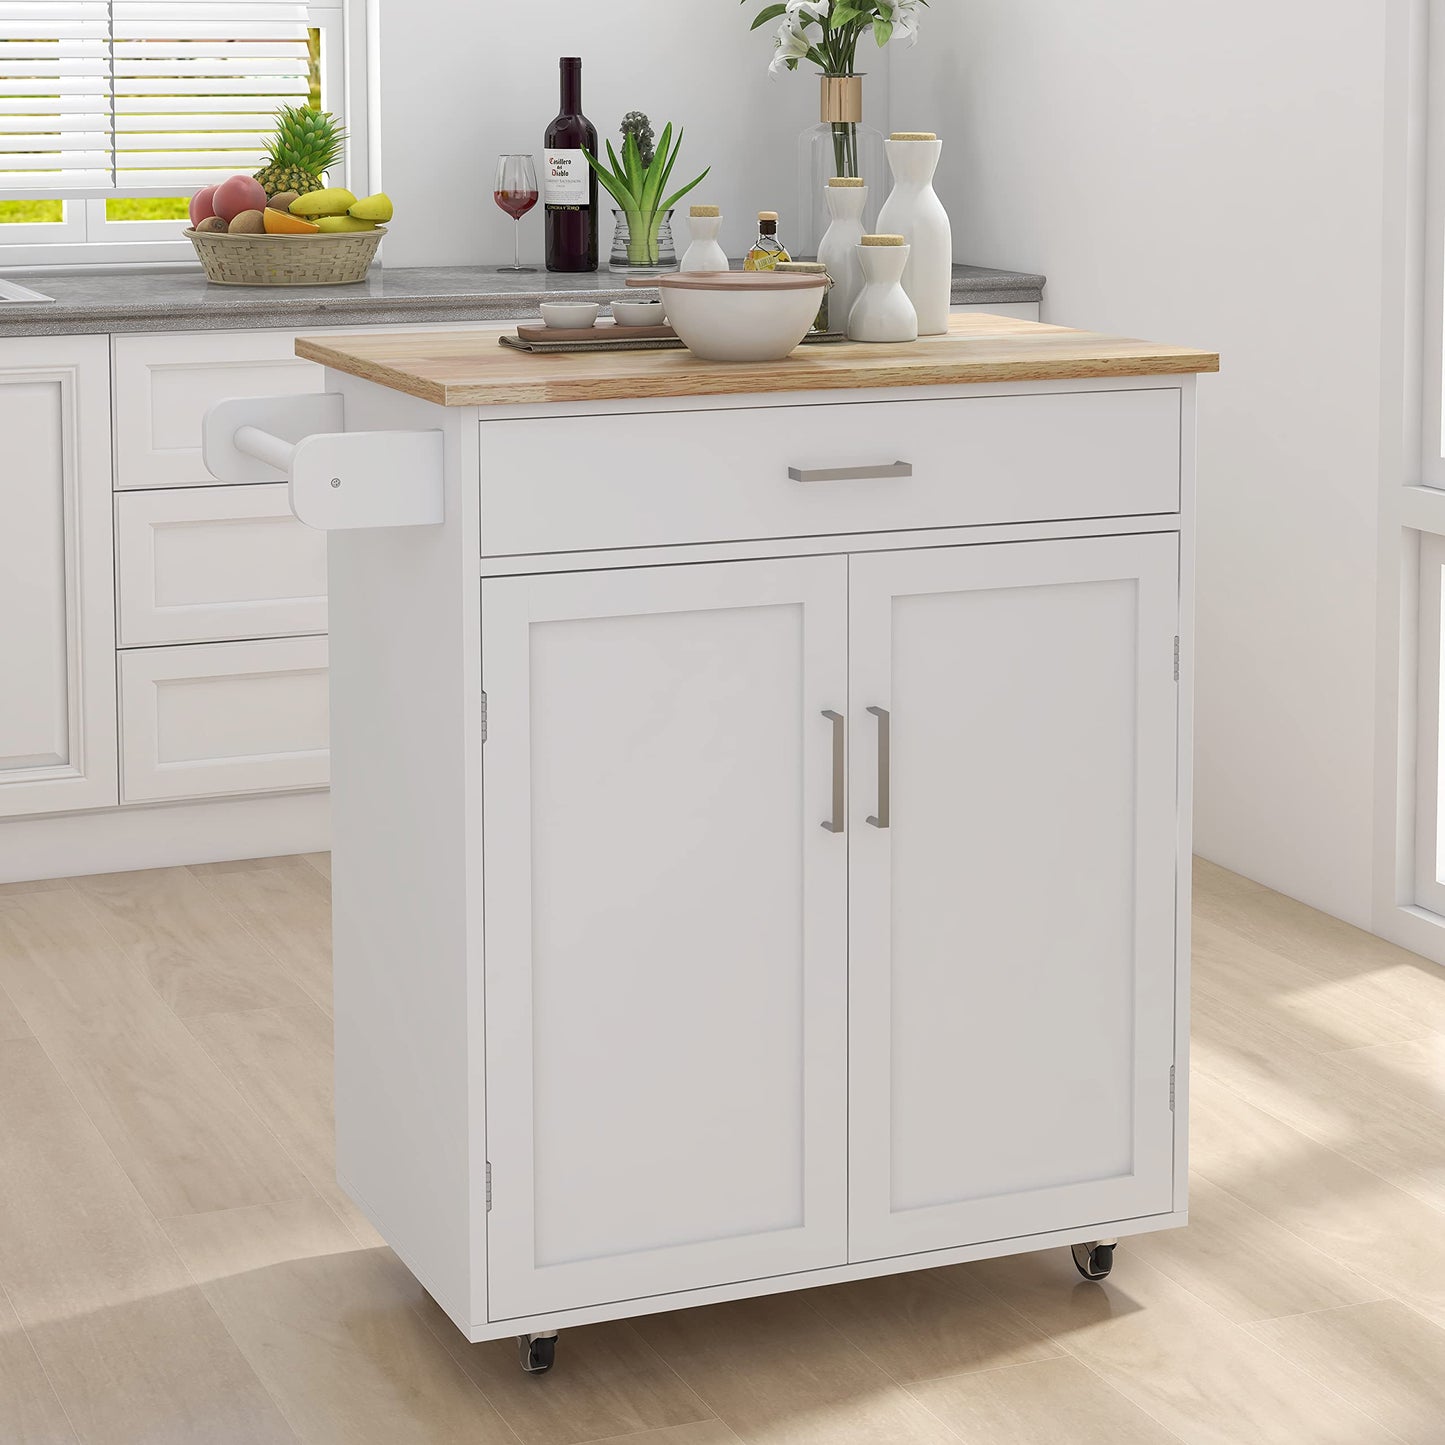 RASOO Kitchen Island on Wheels White Rolling Trolley Cart Island Cart Storage Cabinet with Rubber Solid Wood Countertop One Drawer and 2 Doors Towel